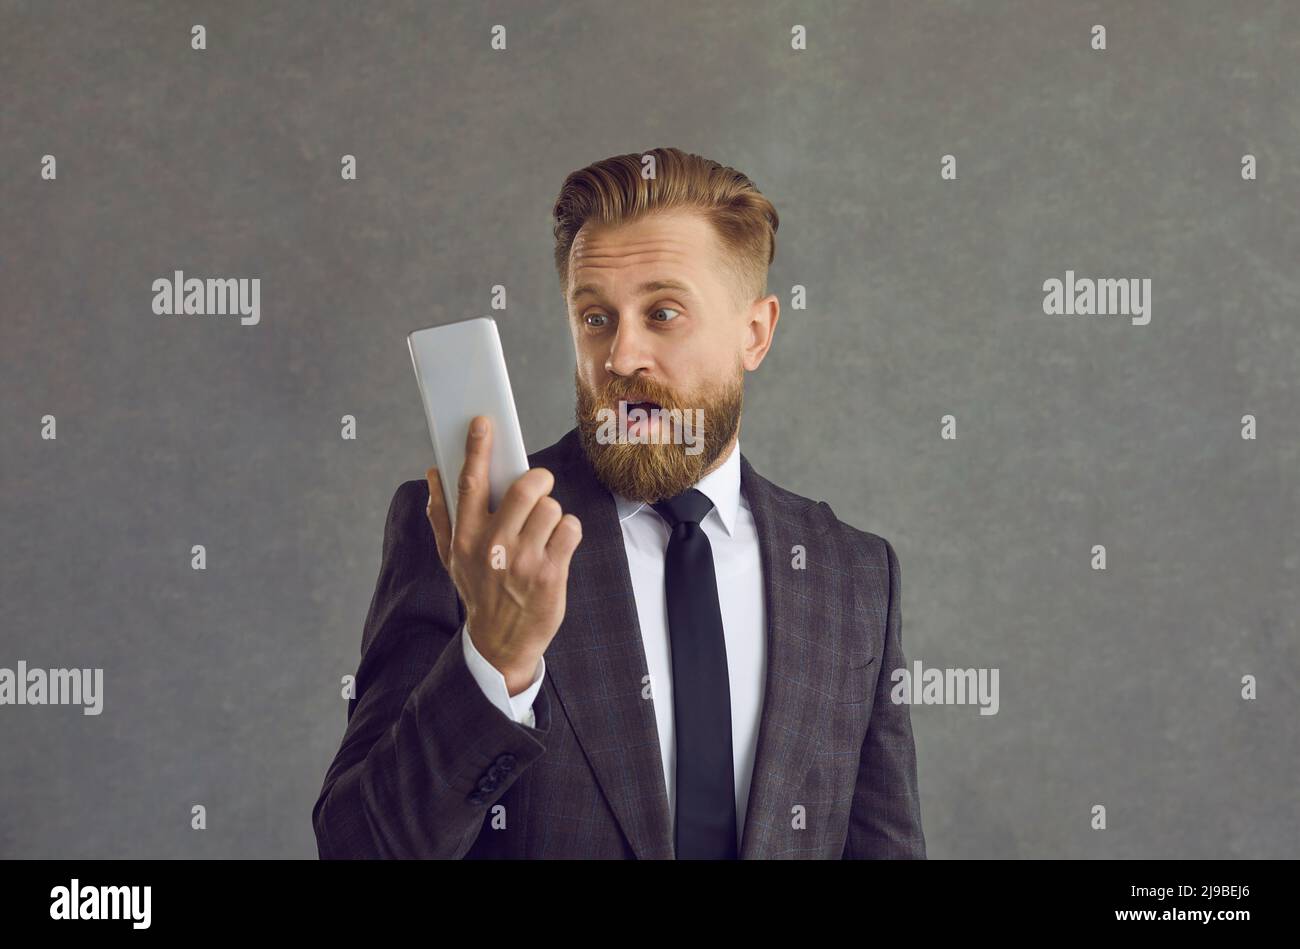 Businessman in suit looking at mobile phone with happy surprised face expression Stock Photo